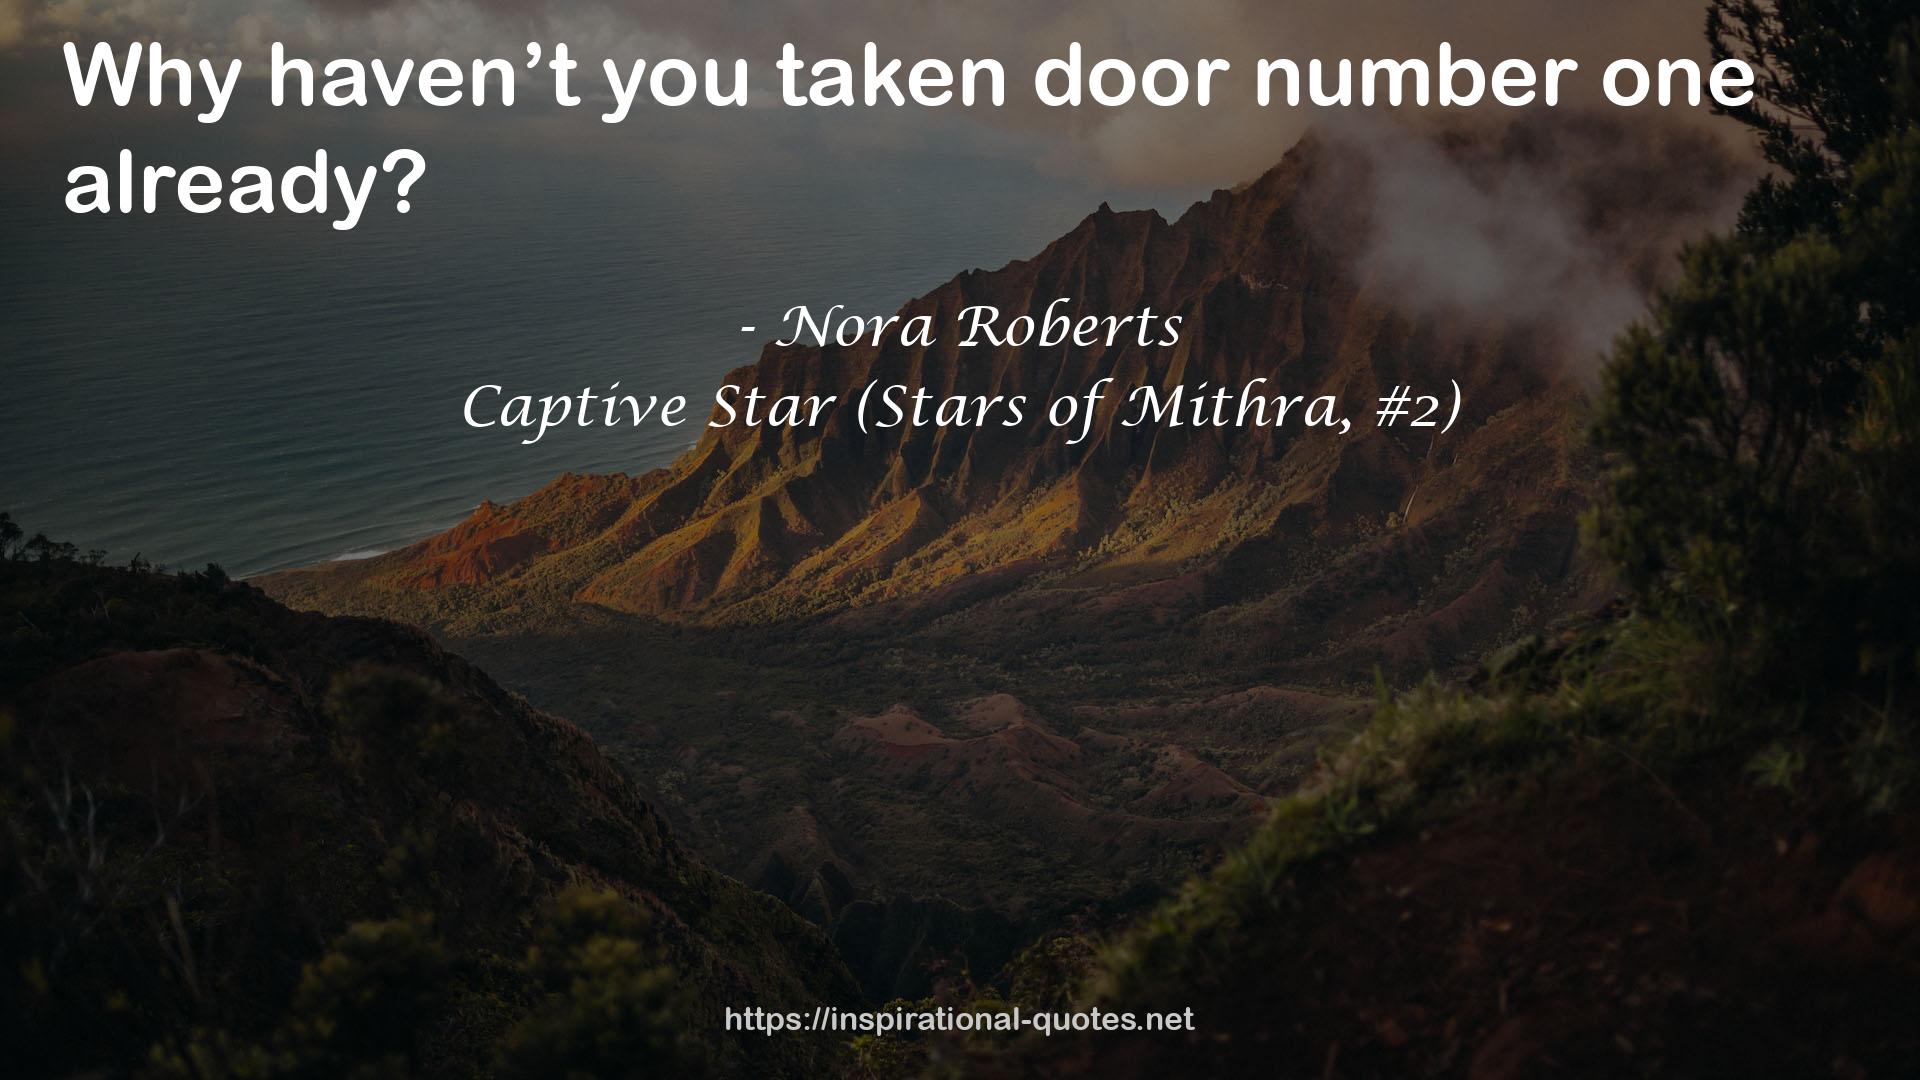 Captive Star (Stars of Mithra, #2) QUOTES